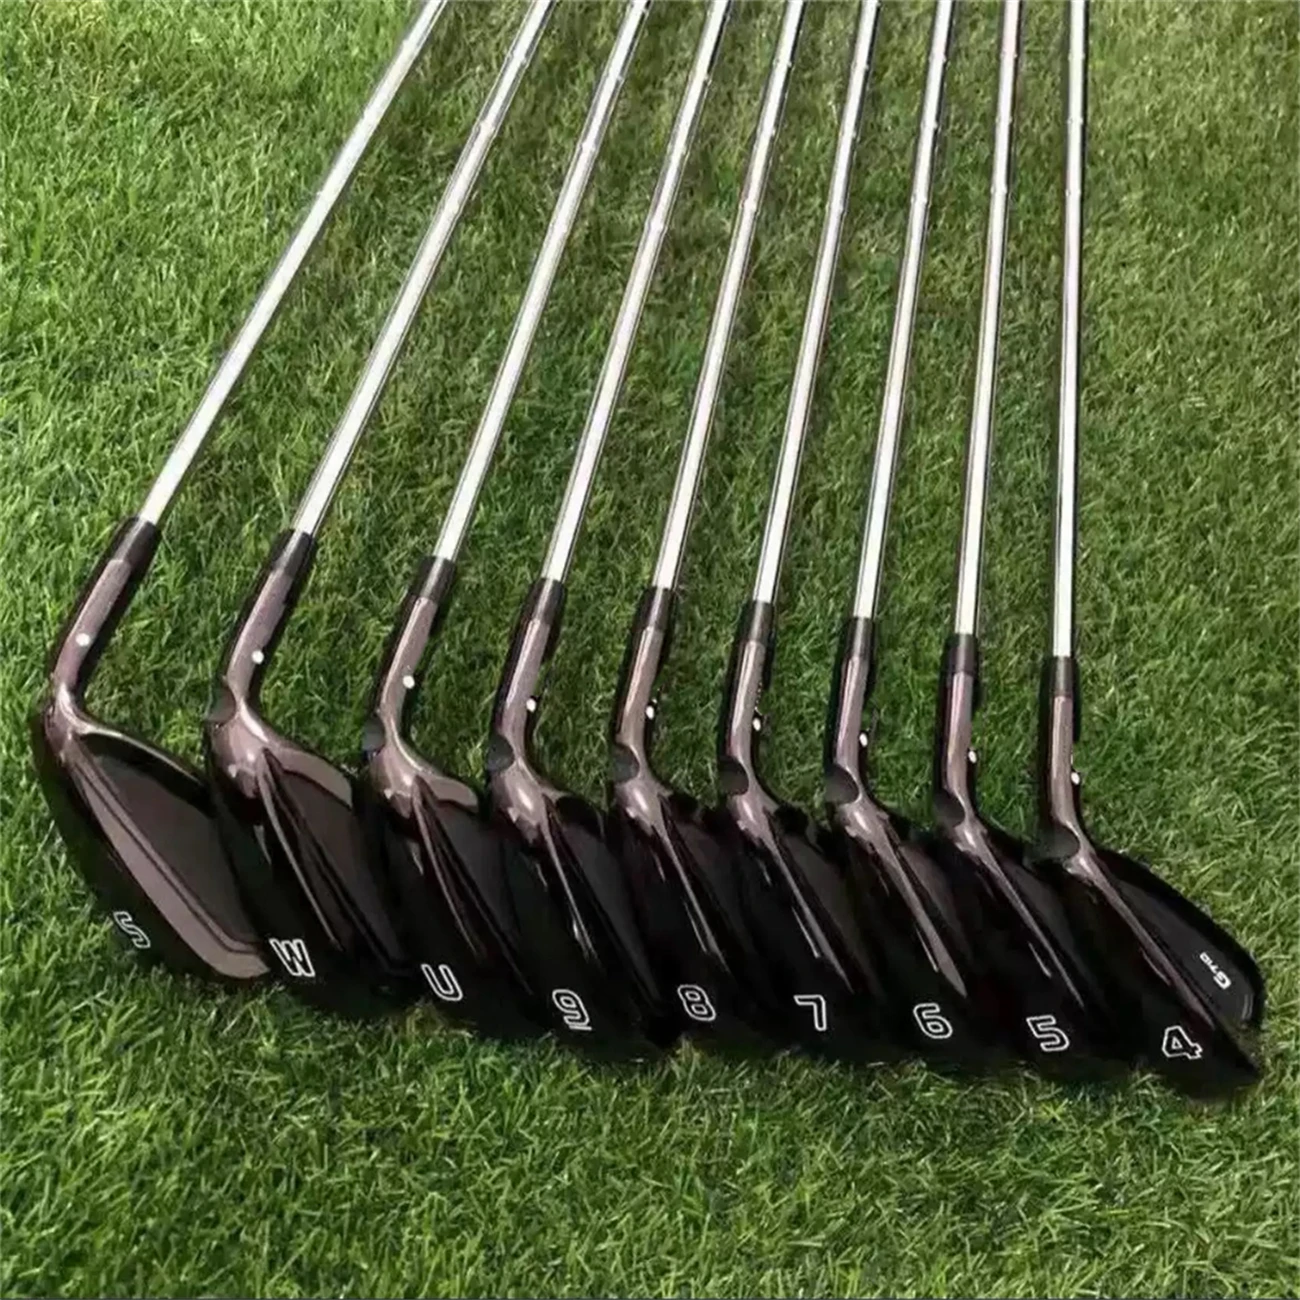 

9PCS Black PG710 Forged Golf Clubs Irons Set 4-9SUW R/S Steel/Graphite Shafts Including Headcovers Quick Shipping